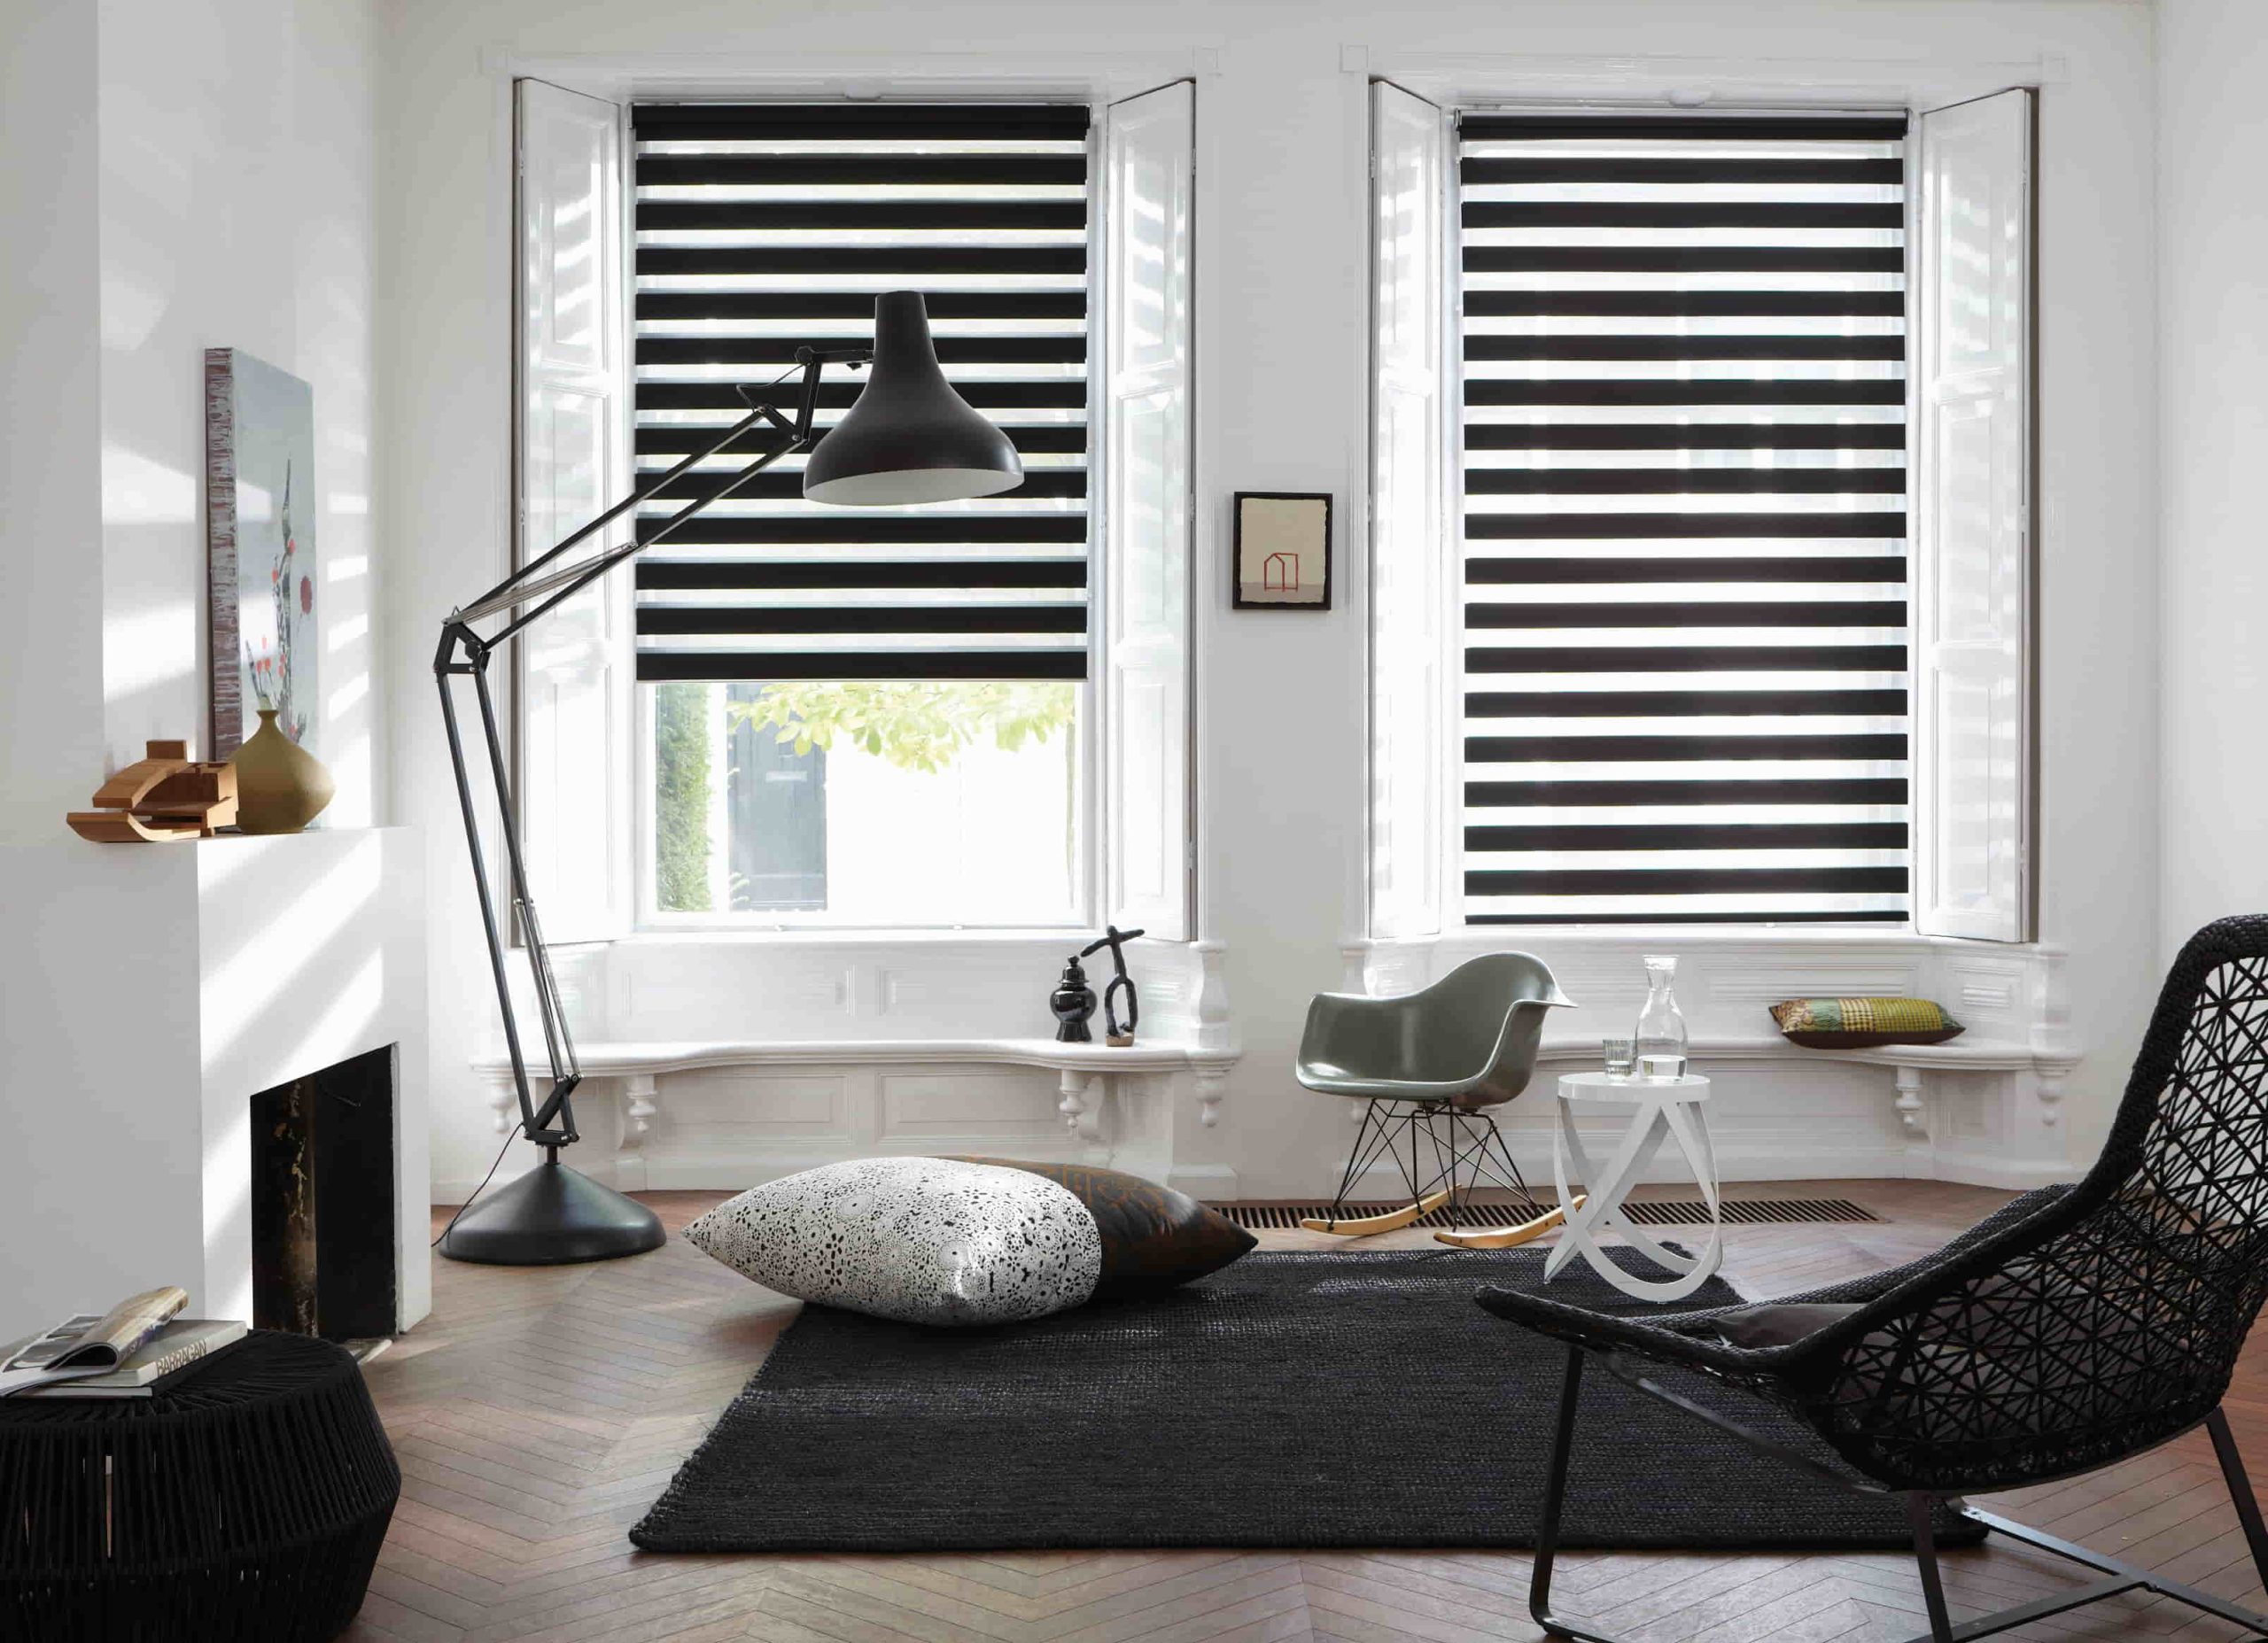 5 Reasons To Invest In Roller Blinds For Your Home